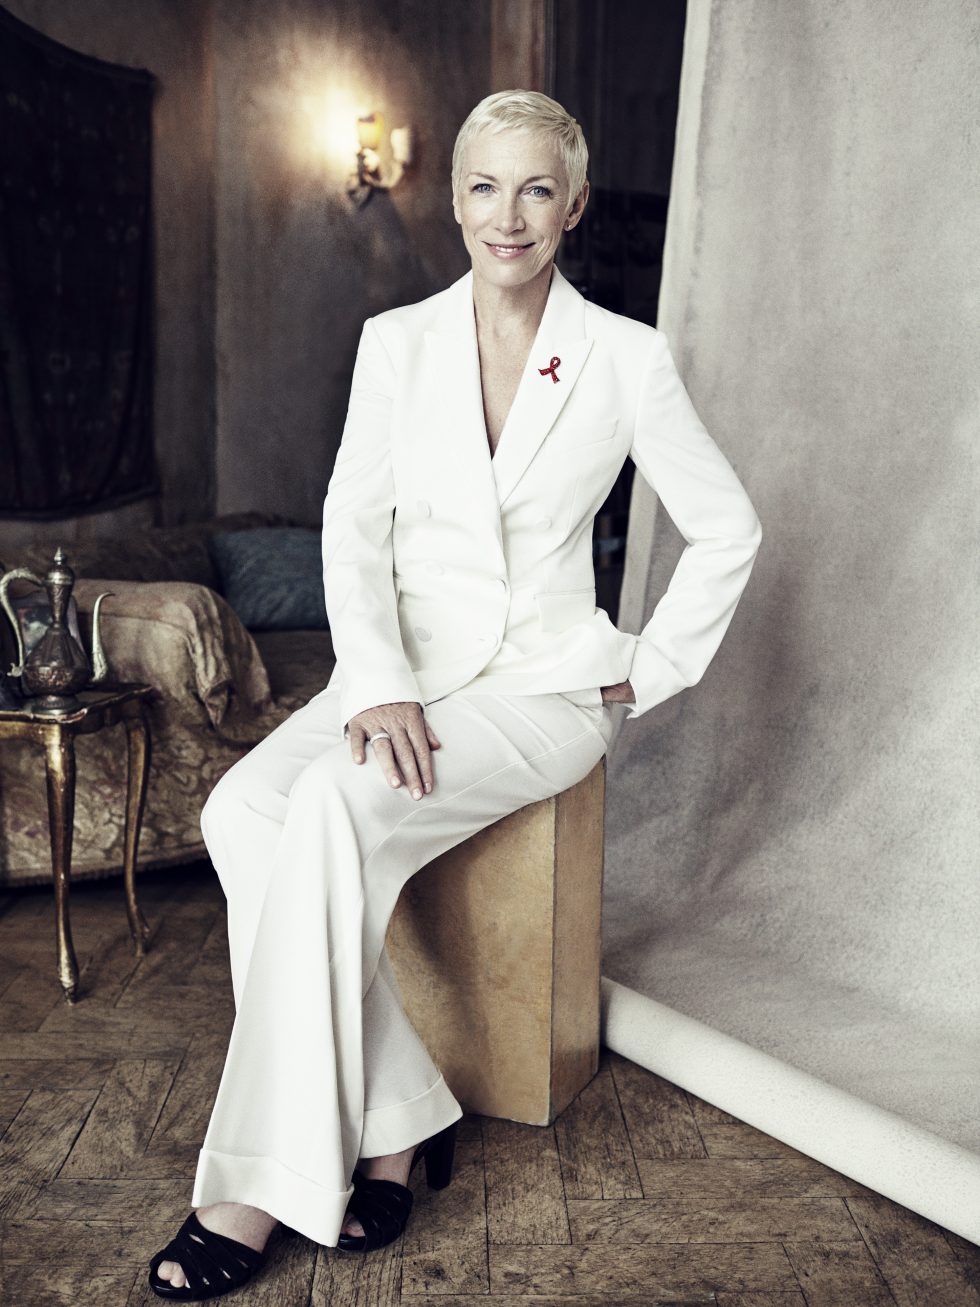 Annie Lennox to become Chancellor of Glasgow Caledonian University.